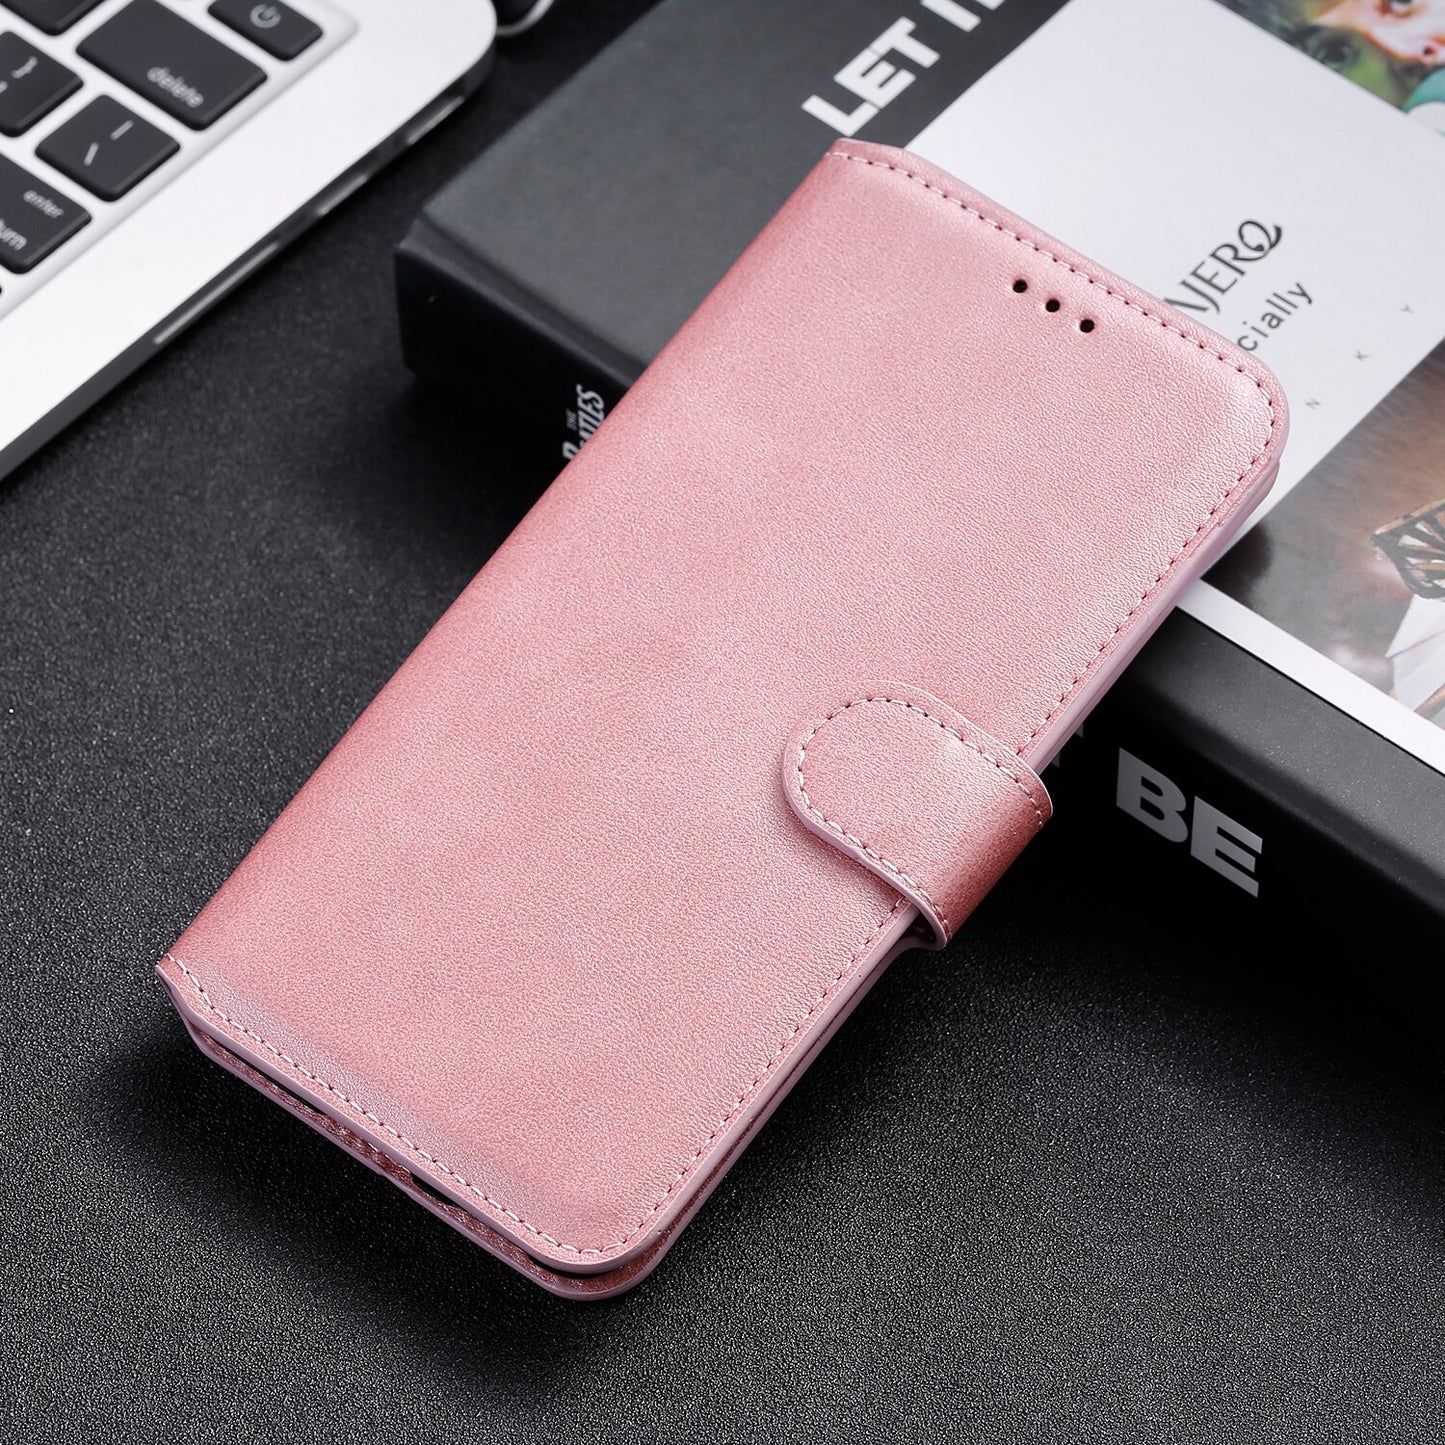 Luxury Leather Flip Case For iPhone 12 11 Pro XS MAX XS XR 8 7 SE 2020 6s 6 Plus 5 se Card Slot Wallet Phone Cover